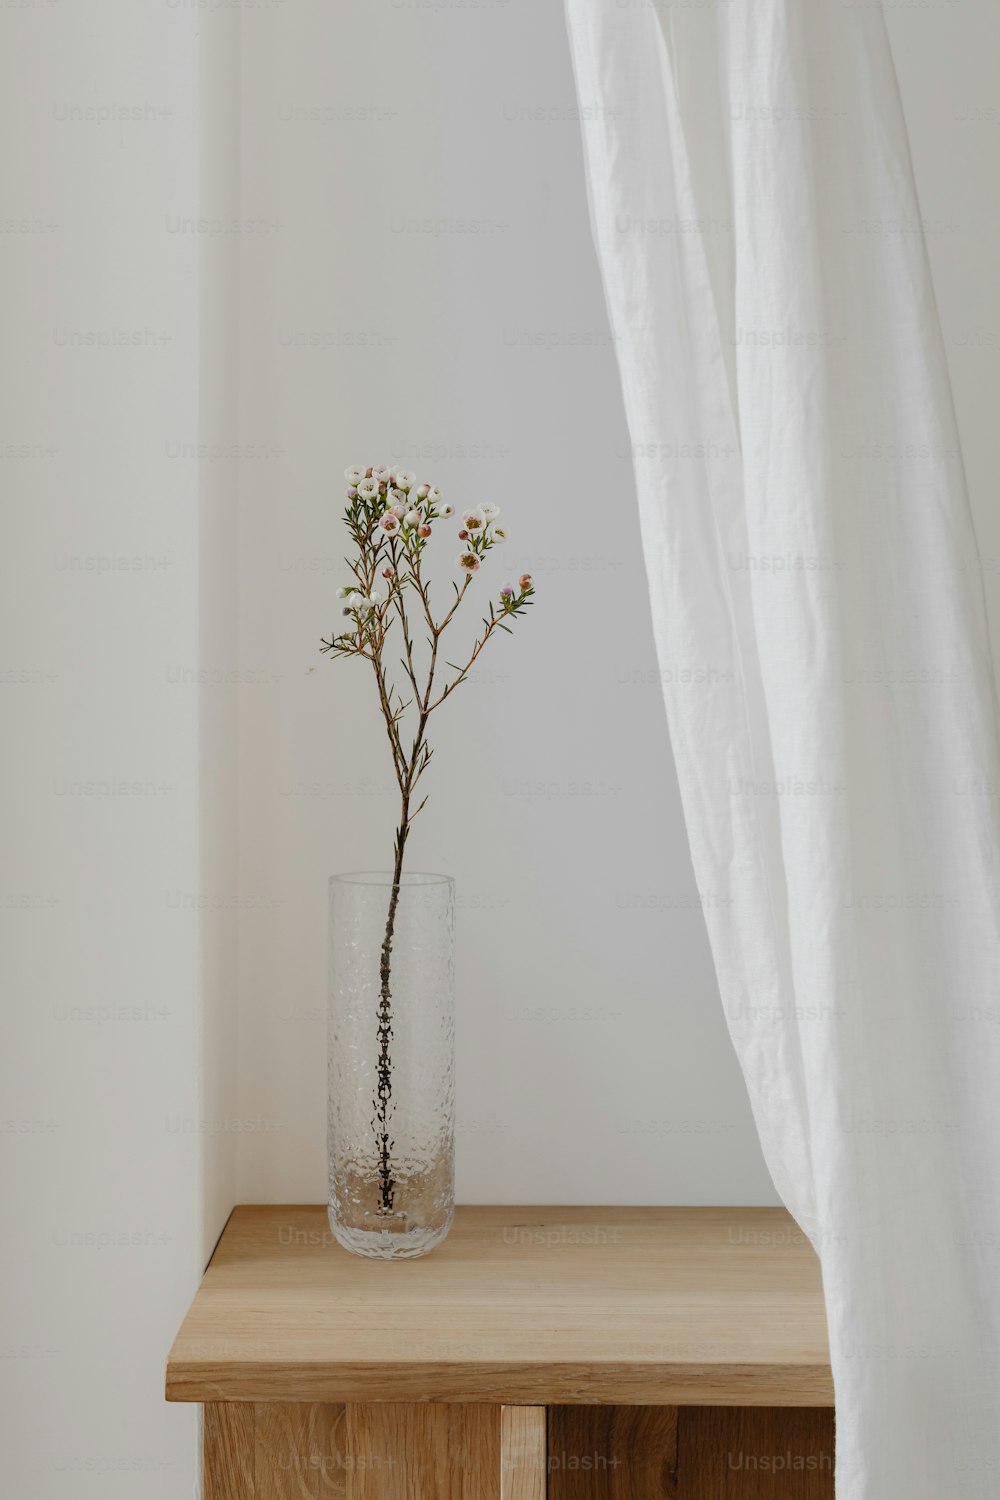 a glass vase with a plant in it on a table